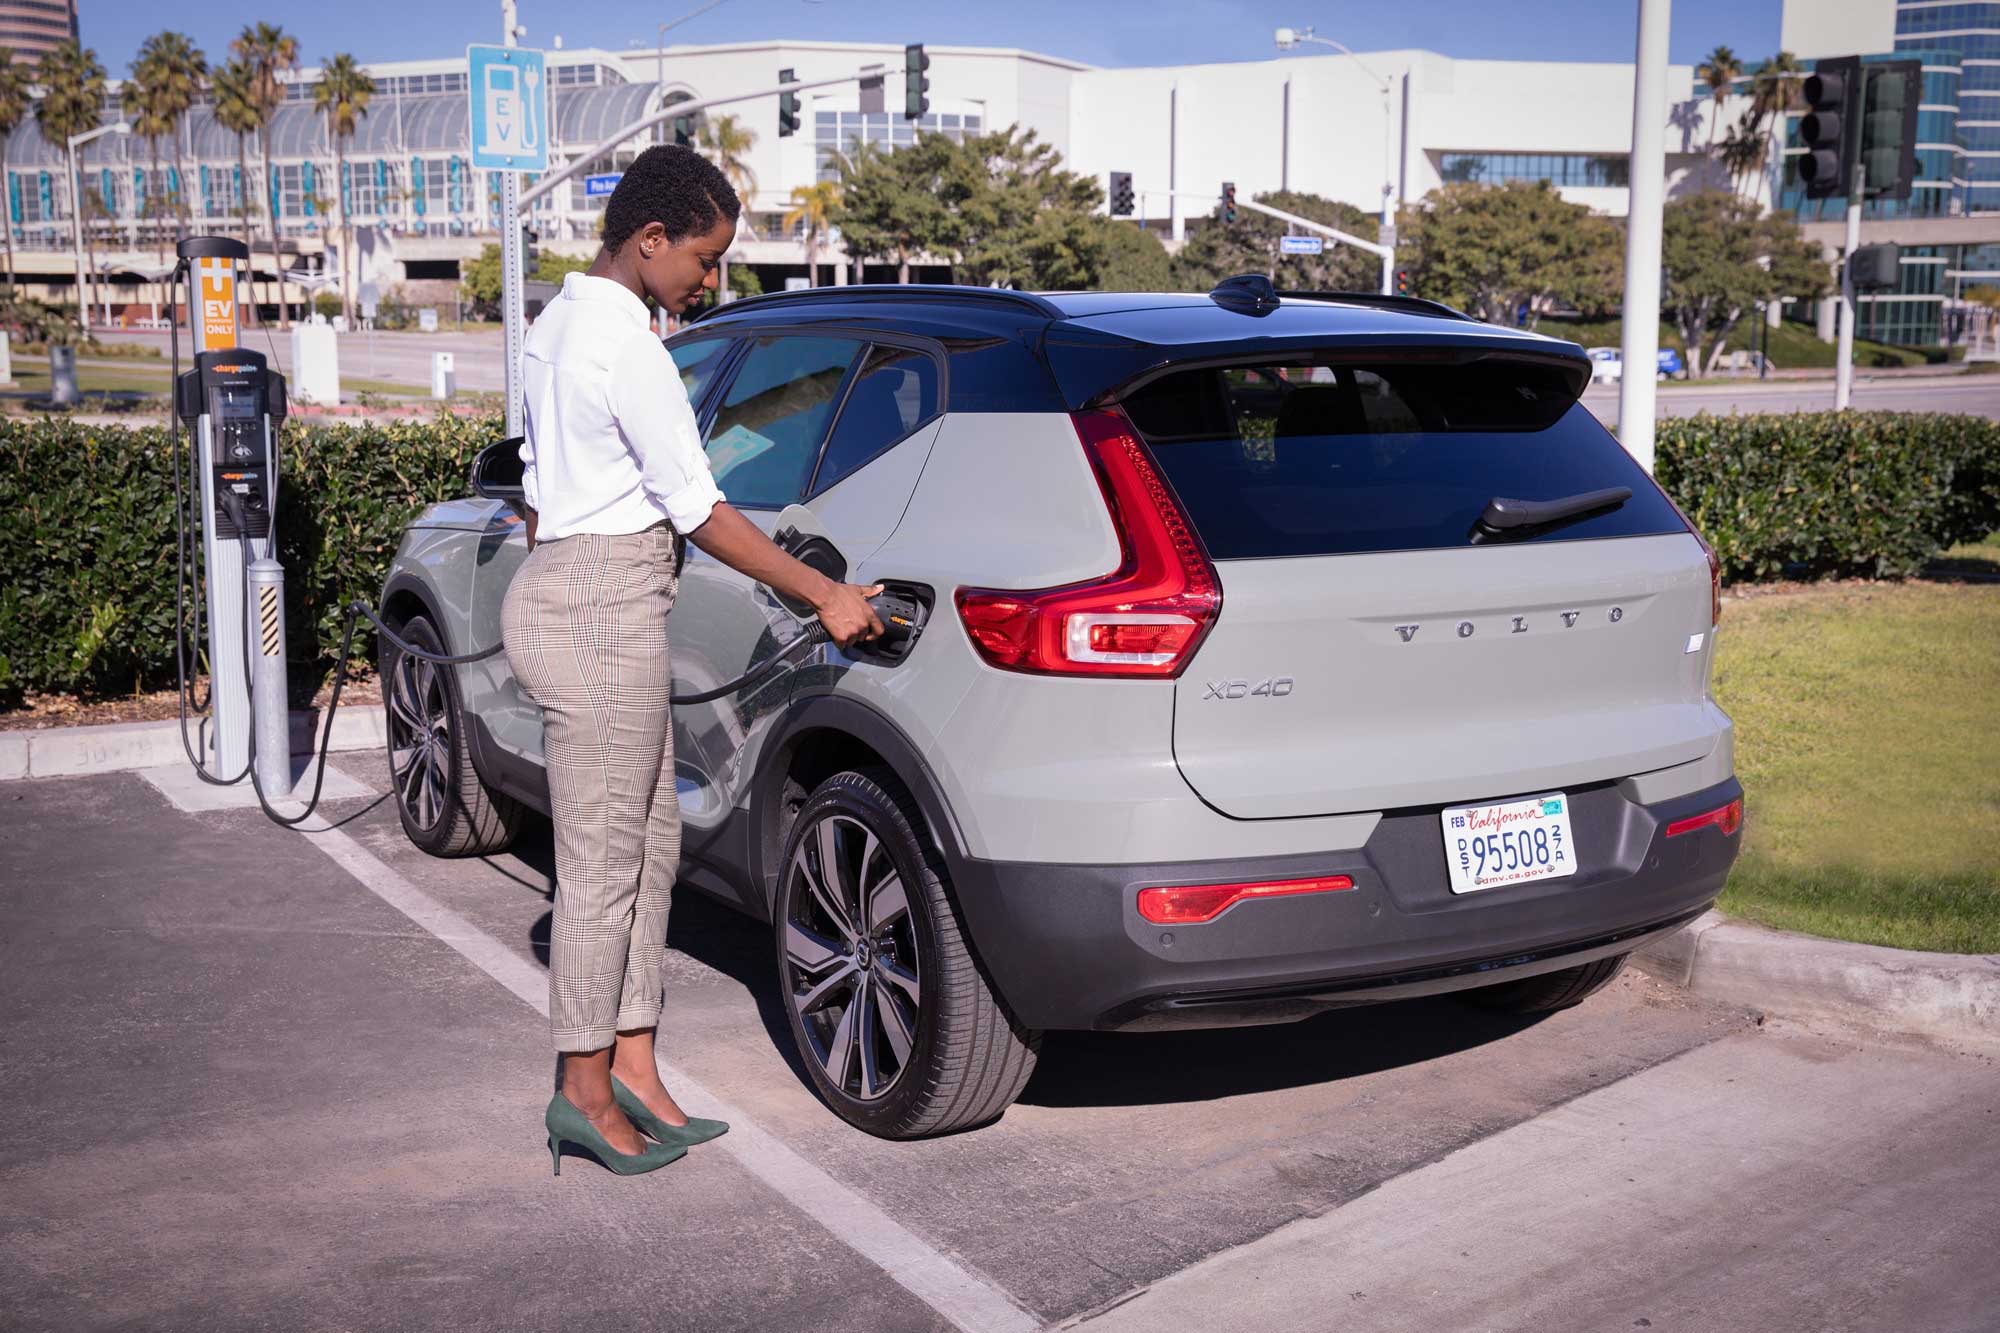 Volvo XC40 Recharge at charging station